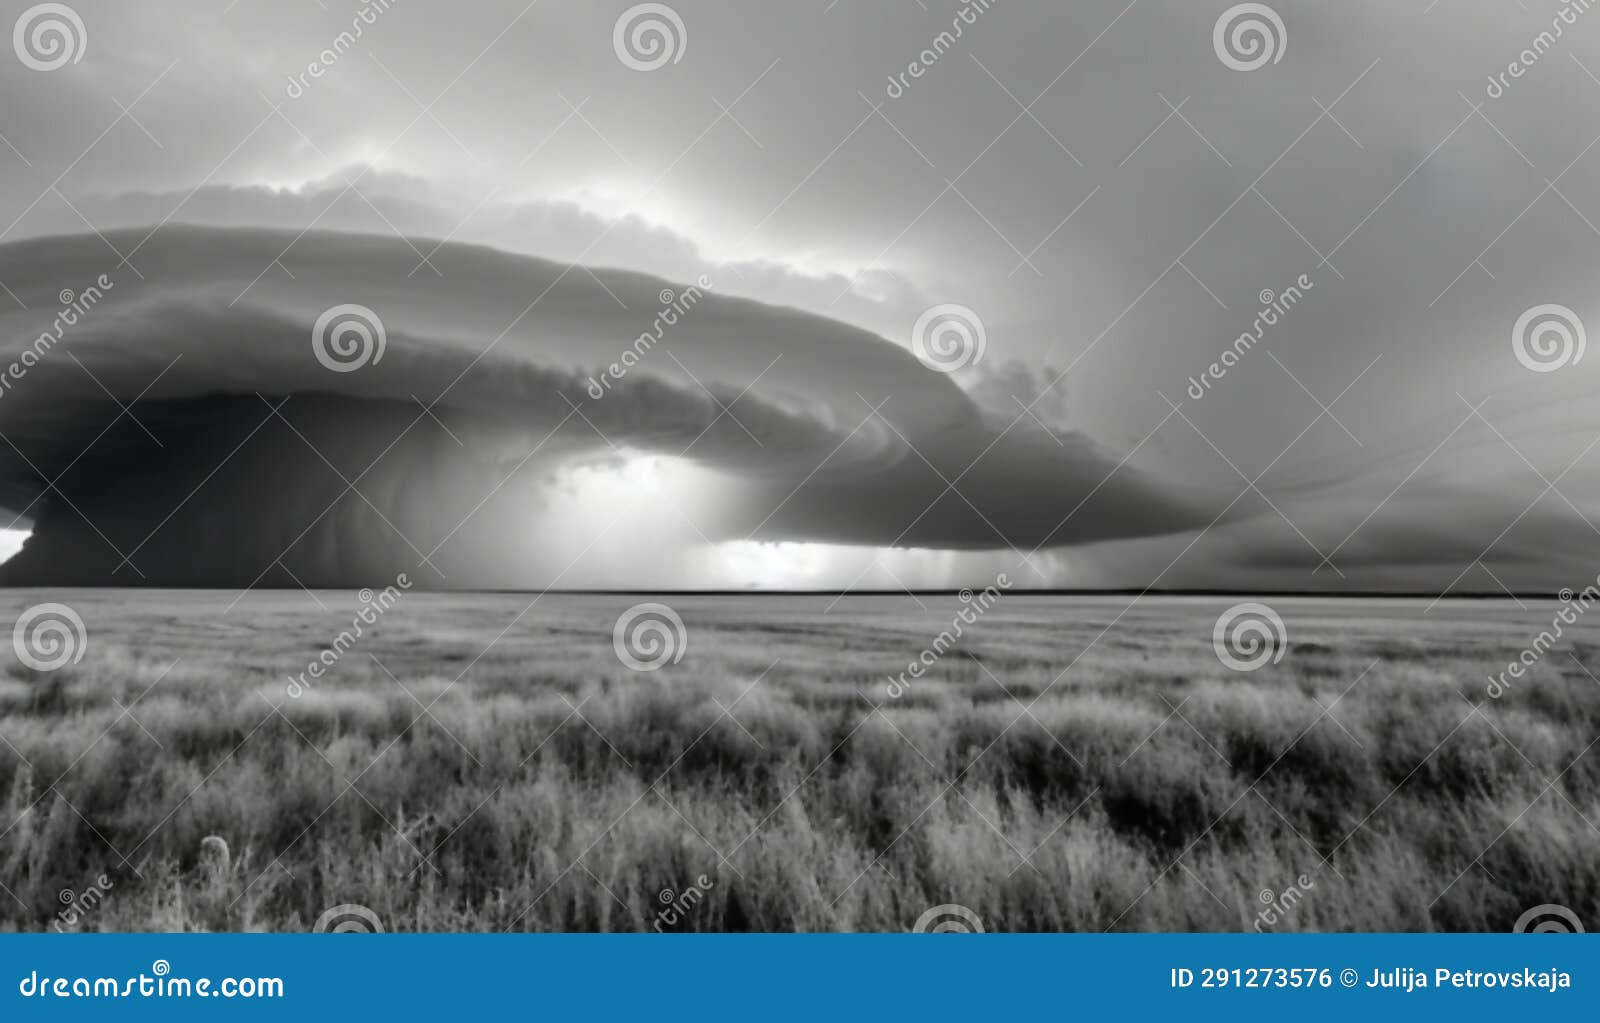 A Supercell Thunderstorm, Presence of a Mesocyclone. Moisture Streams ...